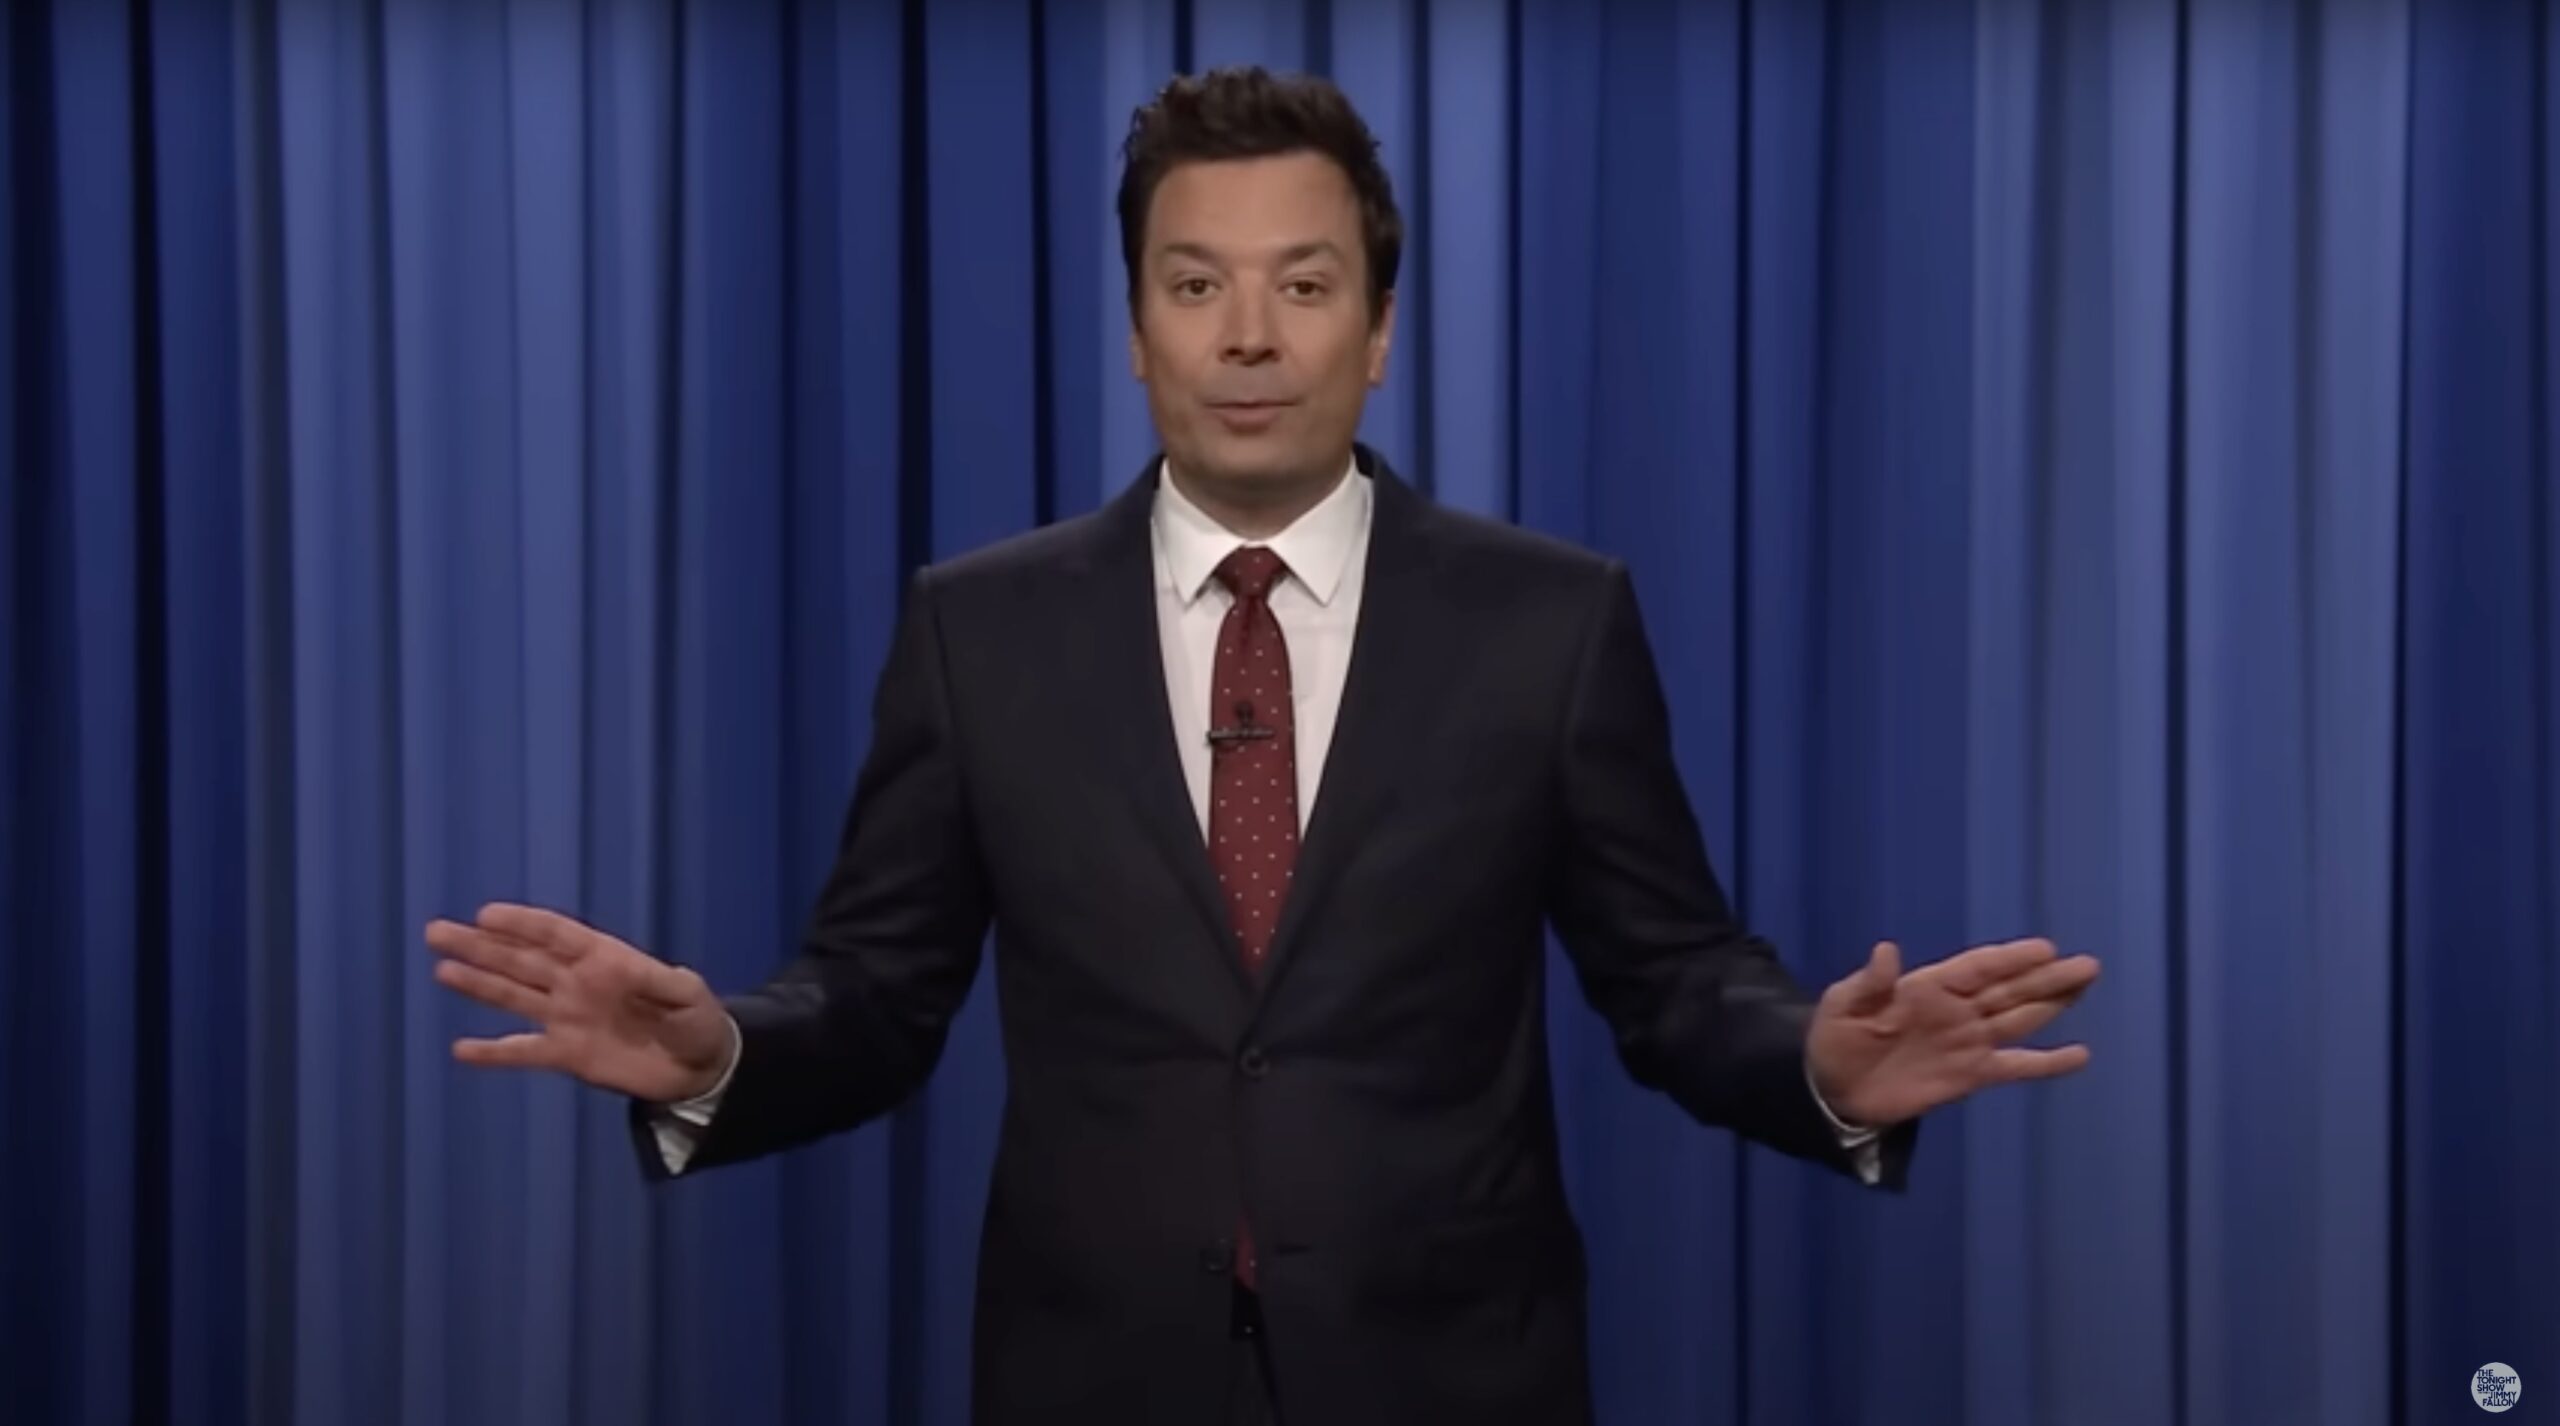 'Thank God He Had Closed Captions' – Left-wing Jimmy Fallon Mocks Biden's Debate Announcement He Mumbles Mess, Jokes About CNN's Lack of Audience (VIDEO) |  The Gateway expert